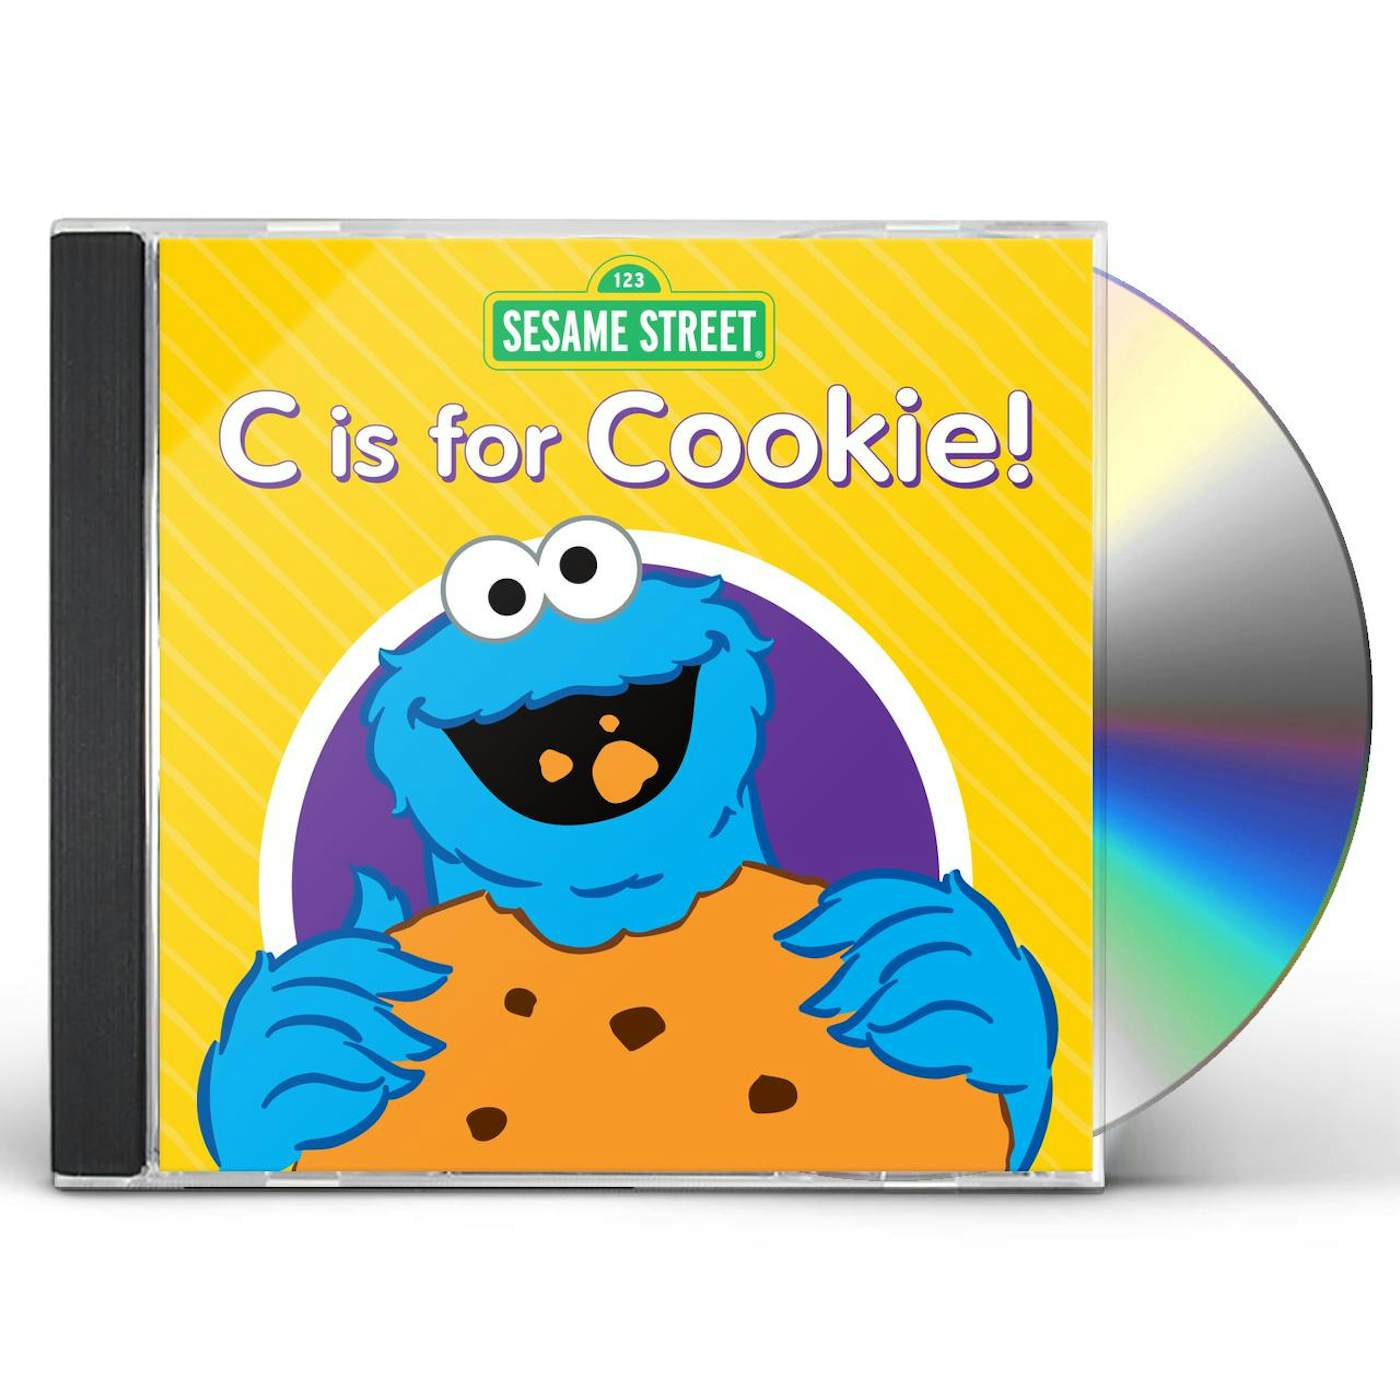 Sesame Street C IS FOR COOKIE CD